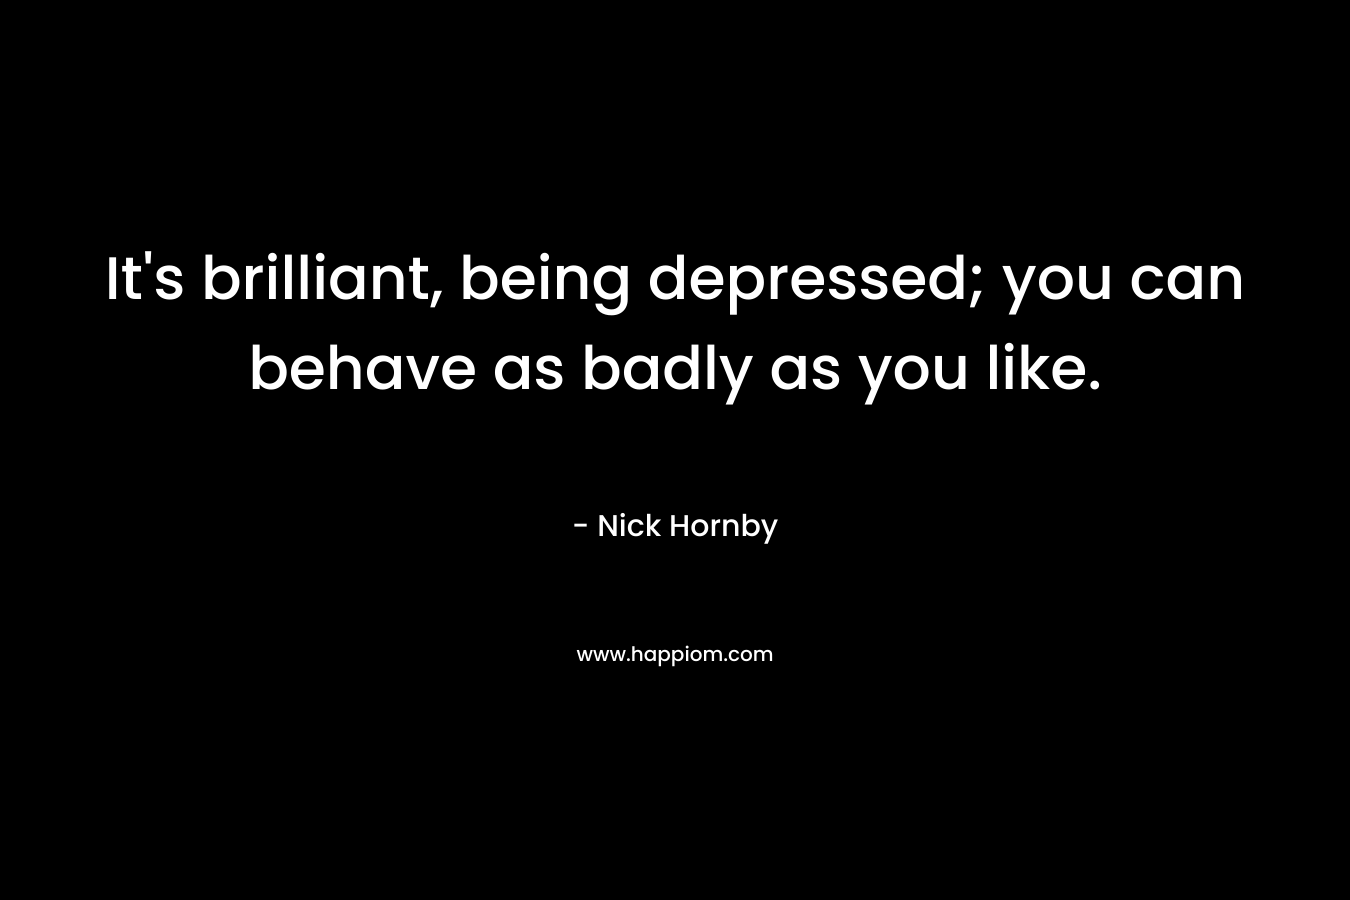 It's brilliant, being depressed; you can behave as badly as you like.